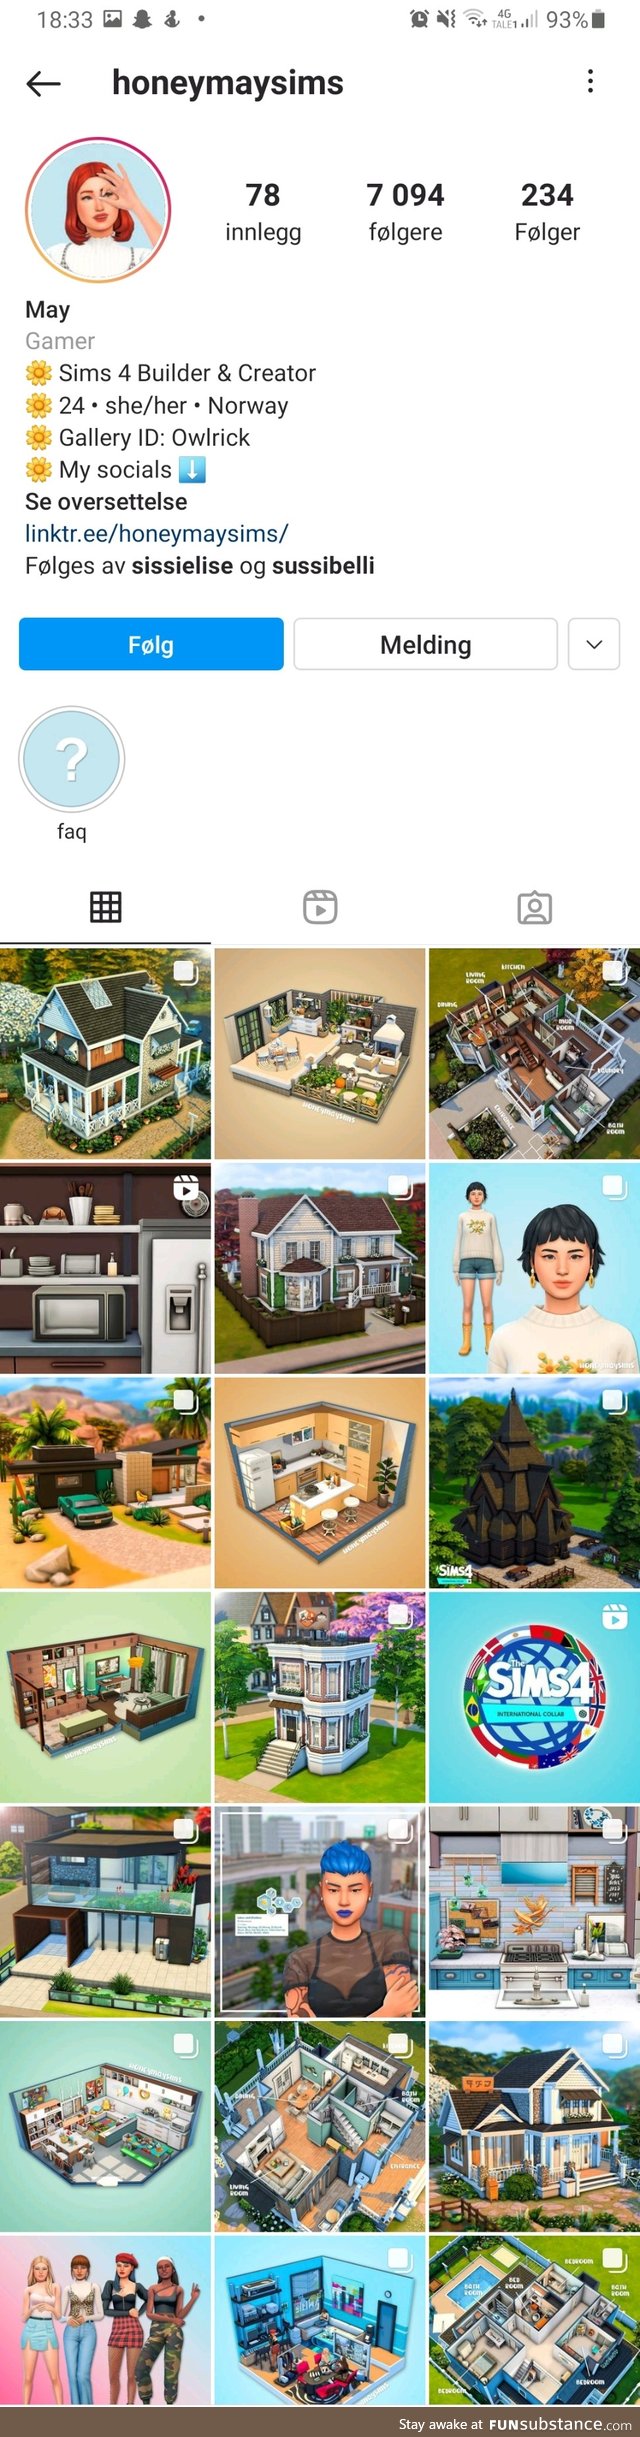 Anyone else who love sims? Found this profile. Great inspiration